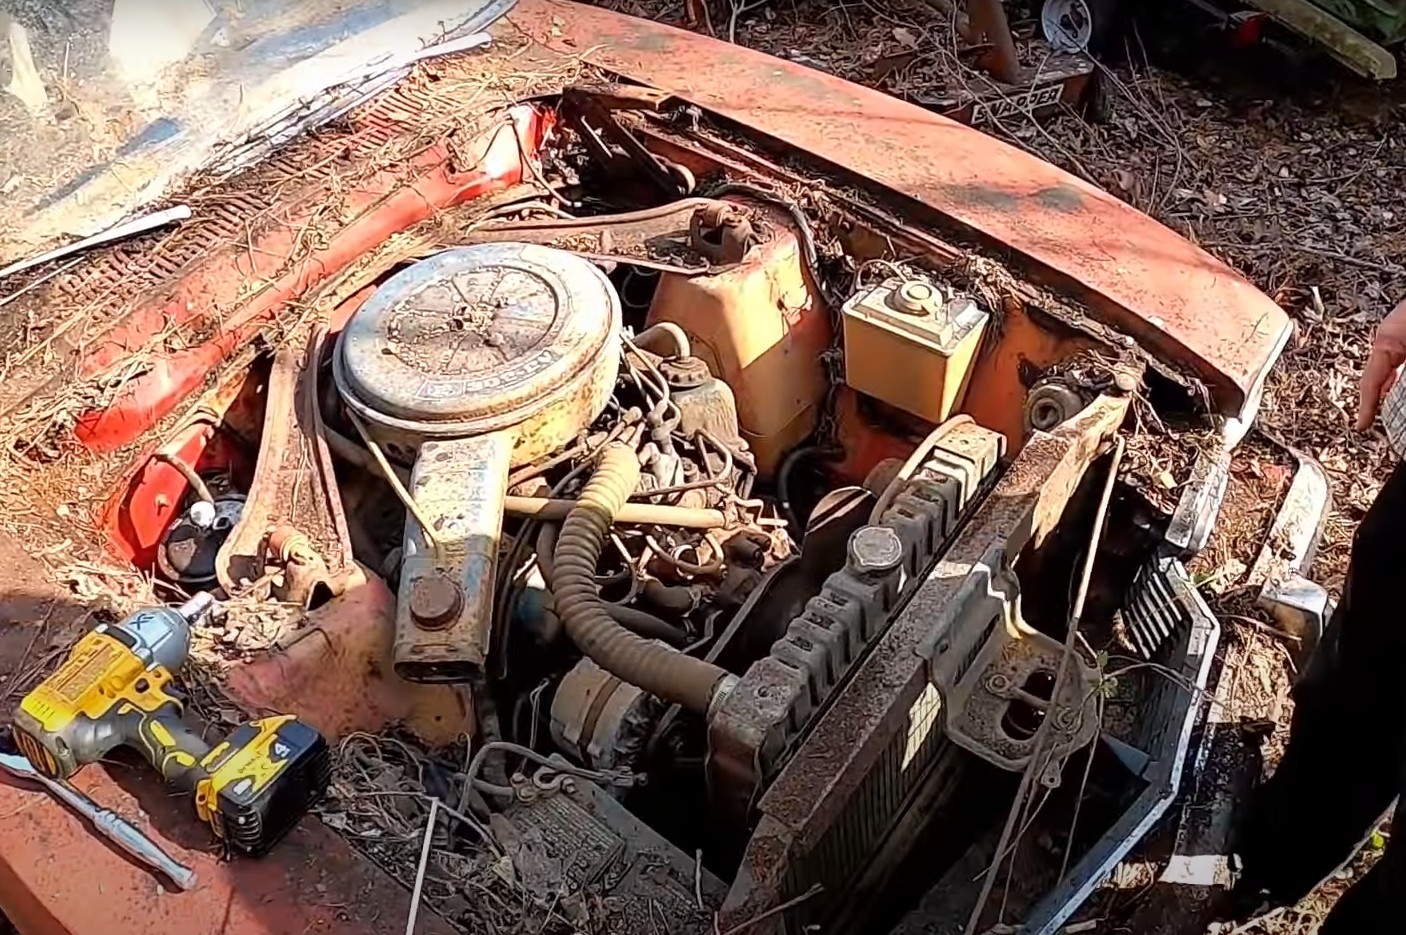 1973 mercury comet gt was left to rot in woods 302 v8 roars again after 36 years 2